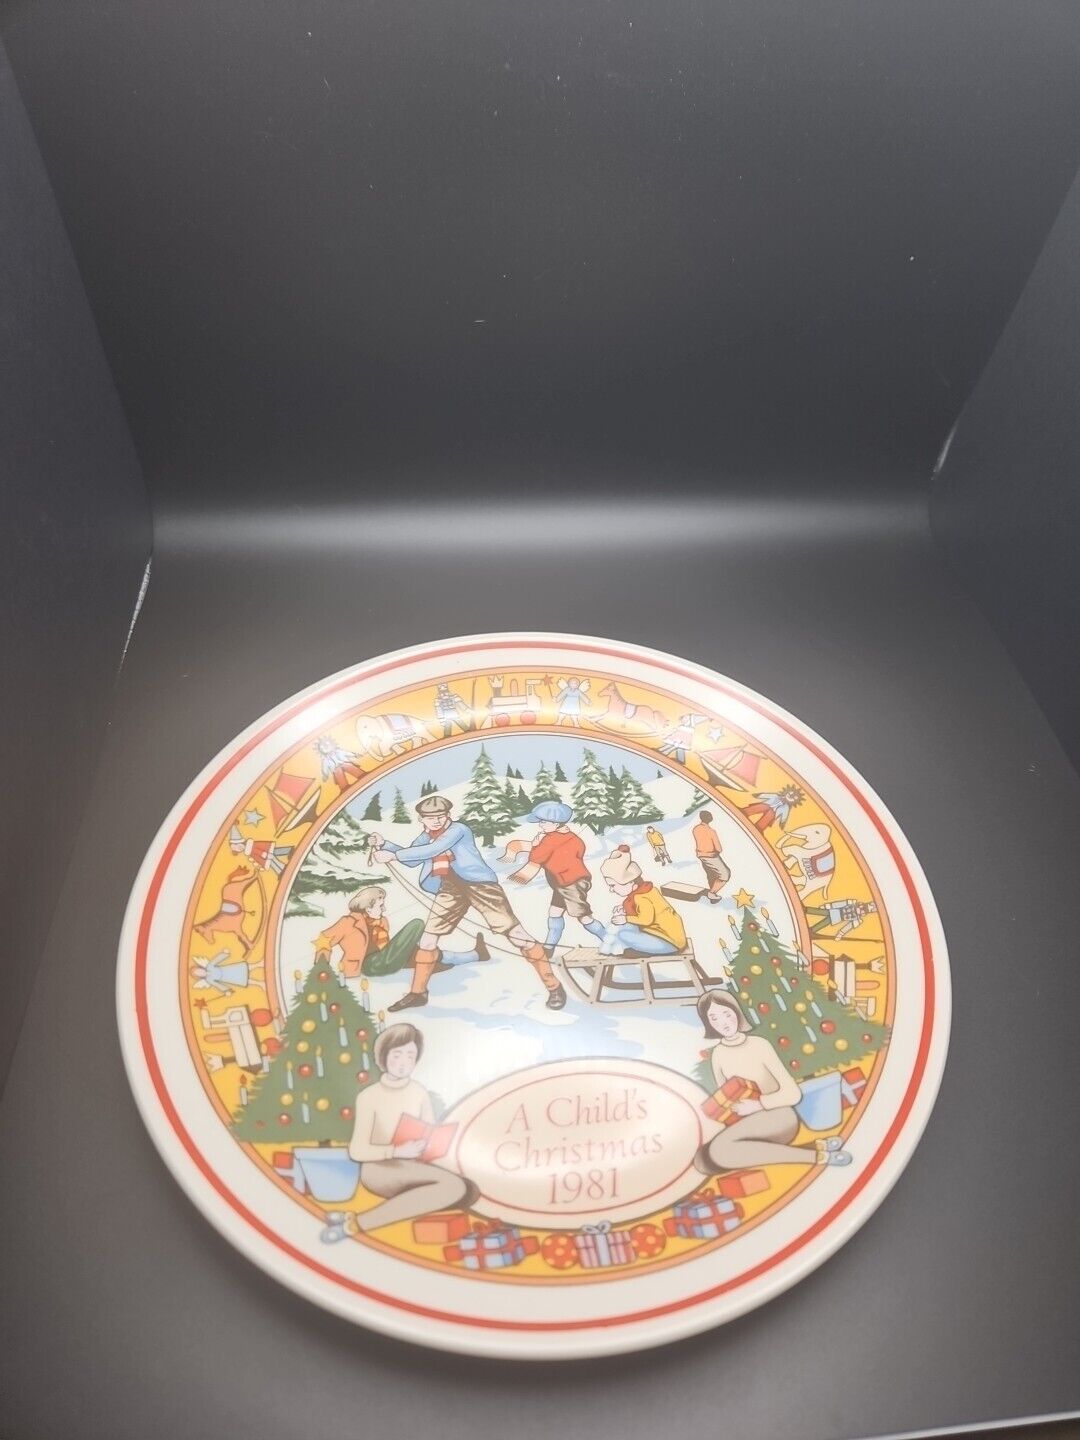  Vintage Wedgwood Ceramic \'A Child\'s Christmas\' 1981 Collector Plate. 4pc